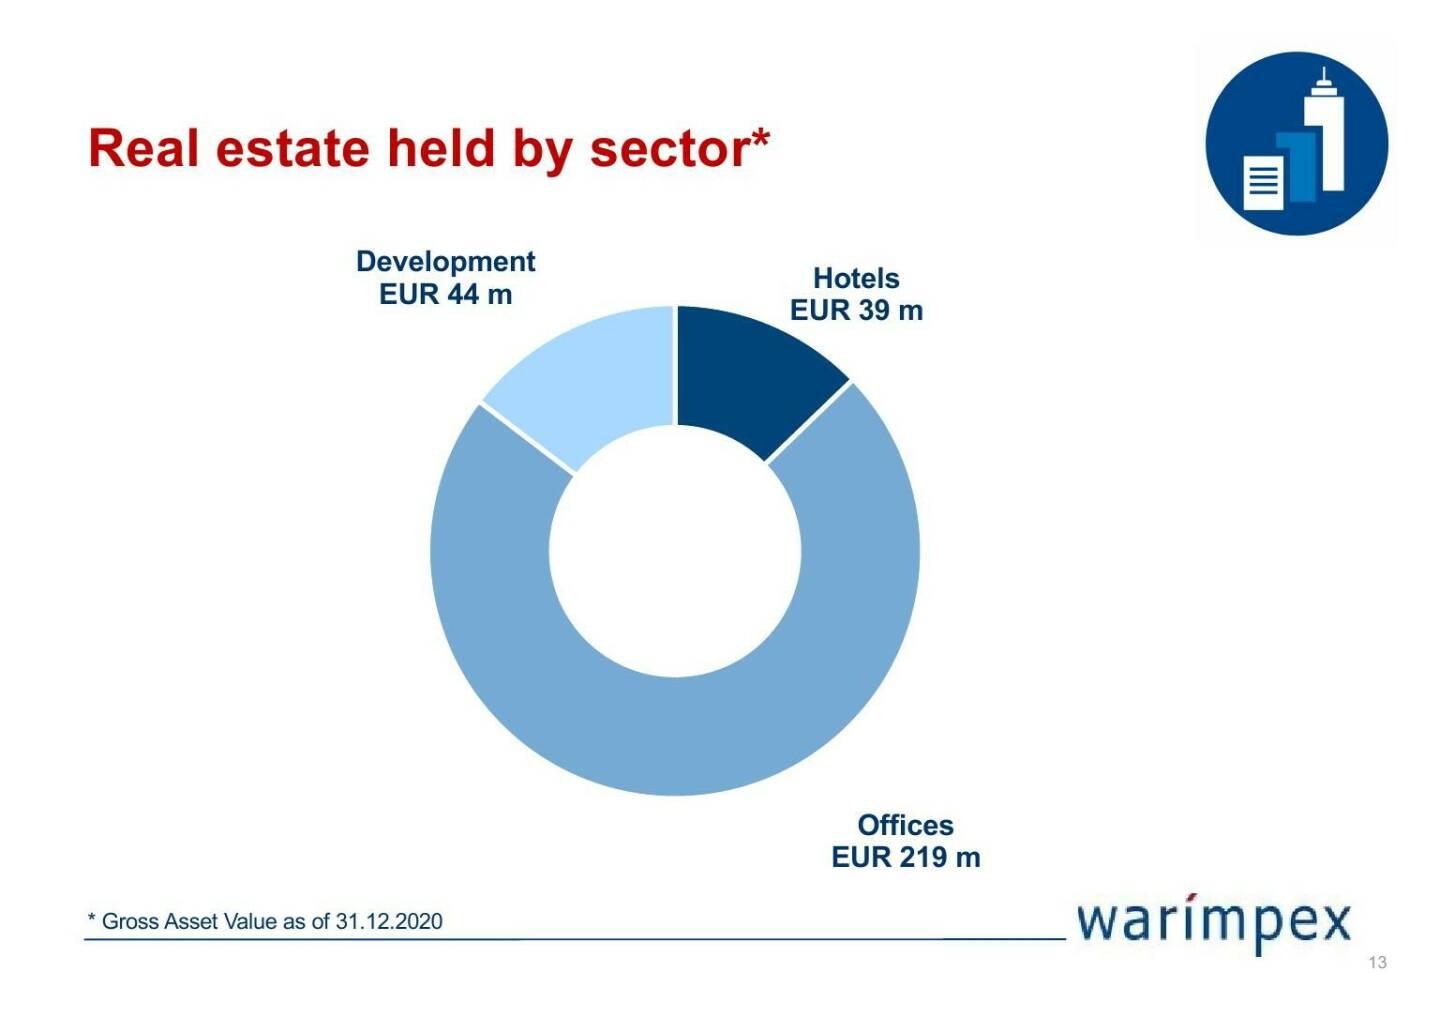 Warimpex - Real estate held by sector